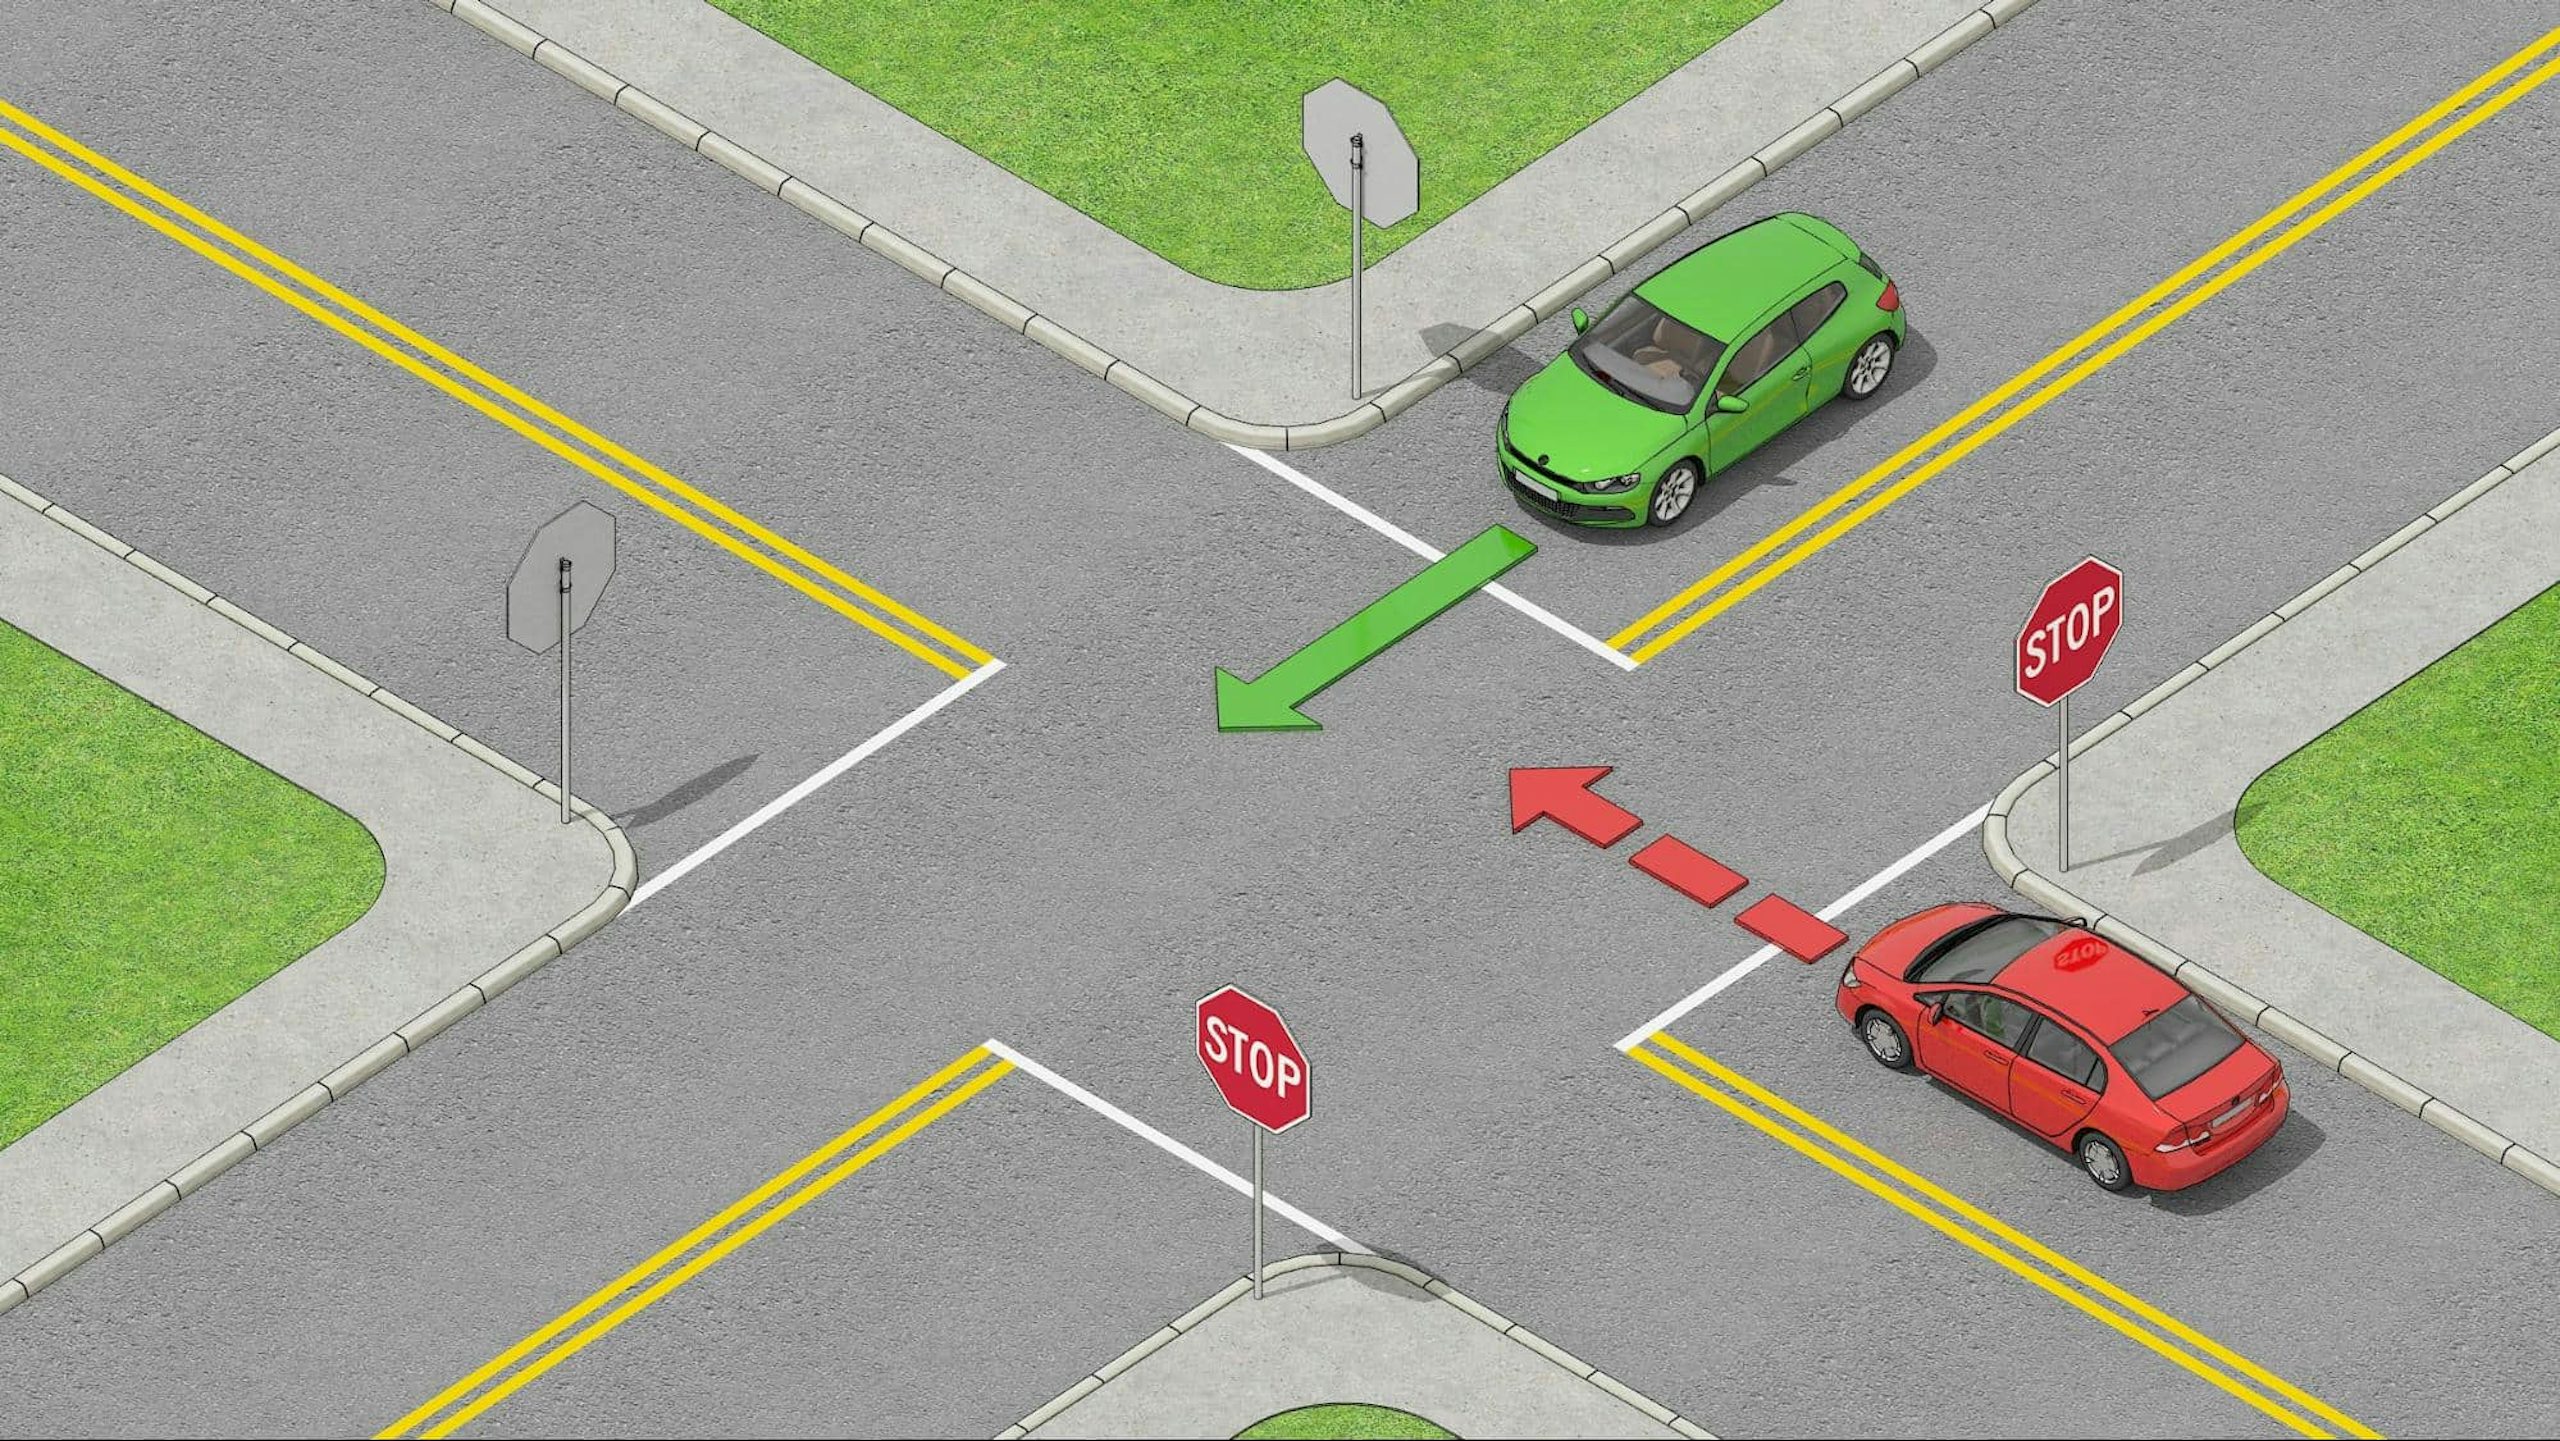 A red car that has to yield to a green car at an intersection